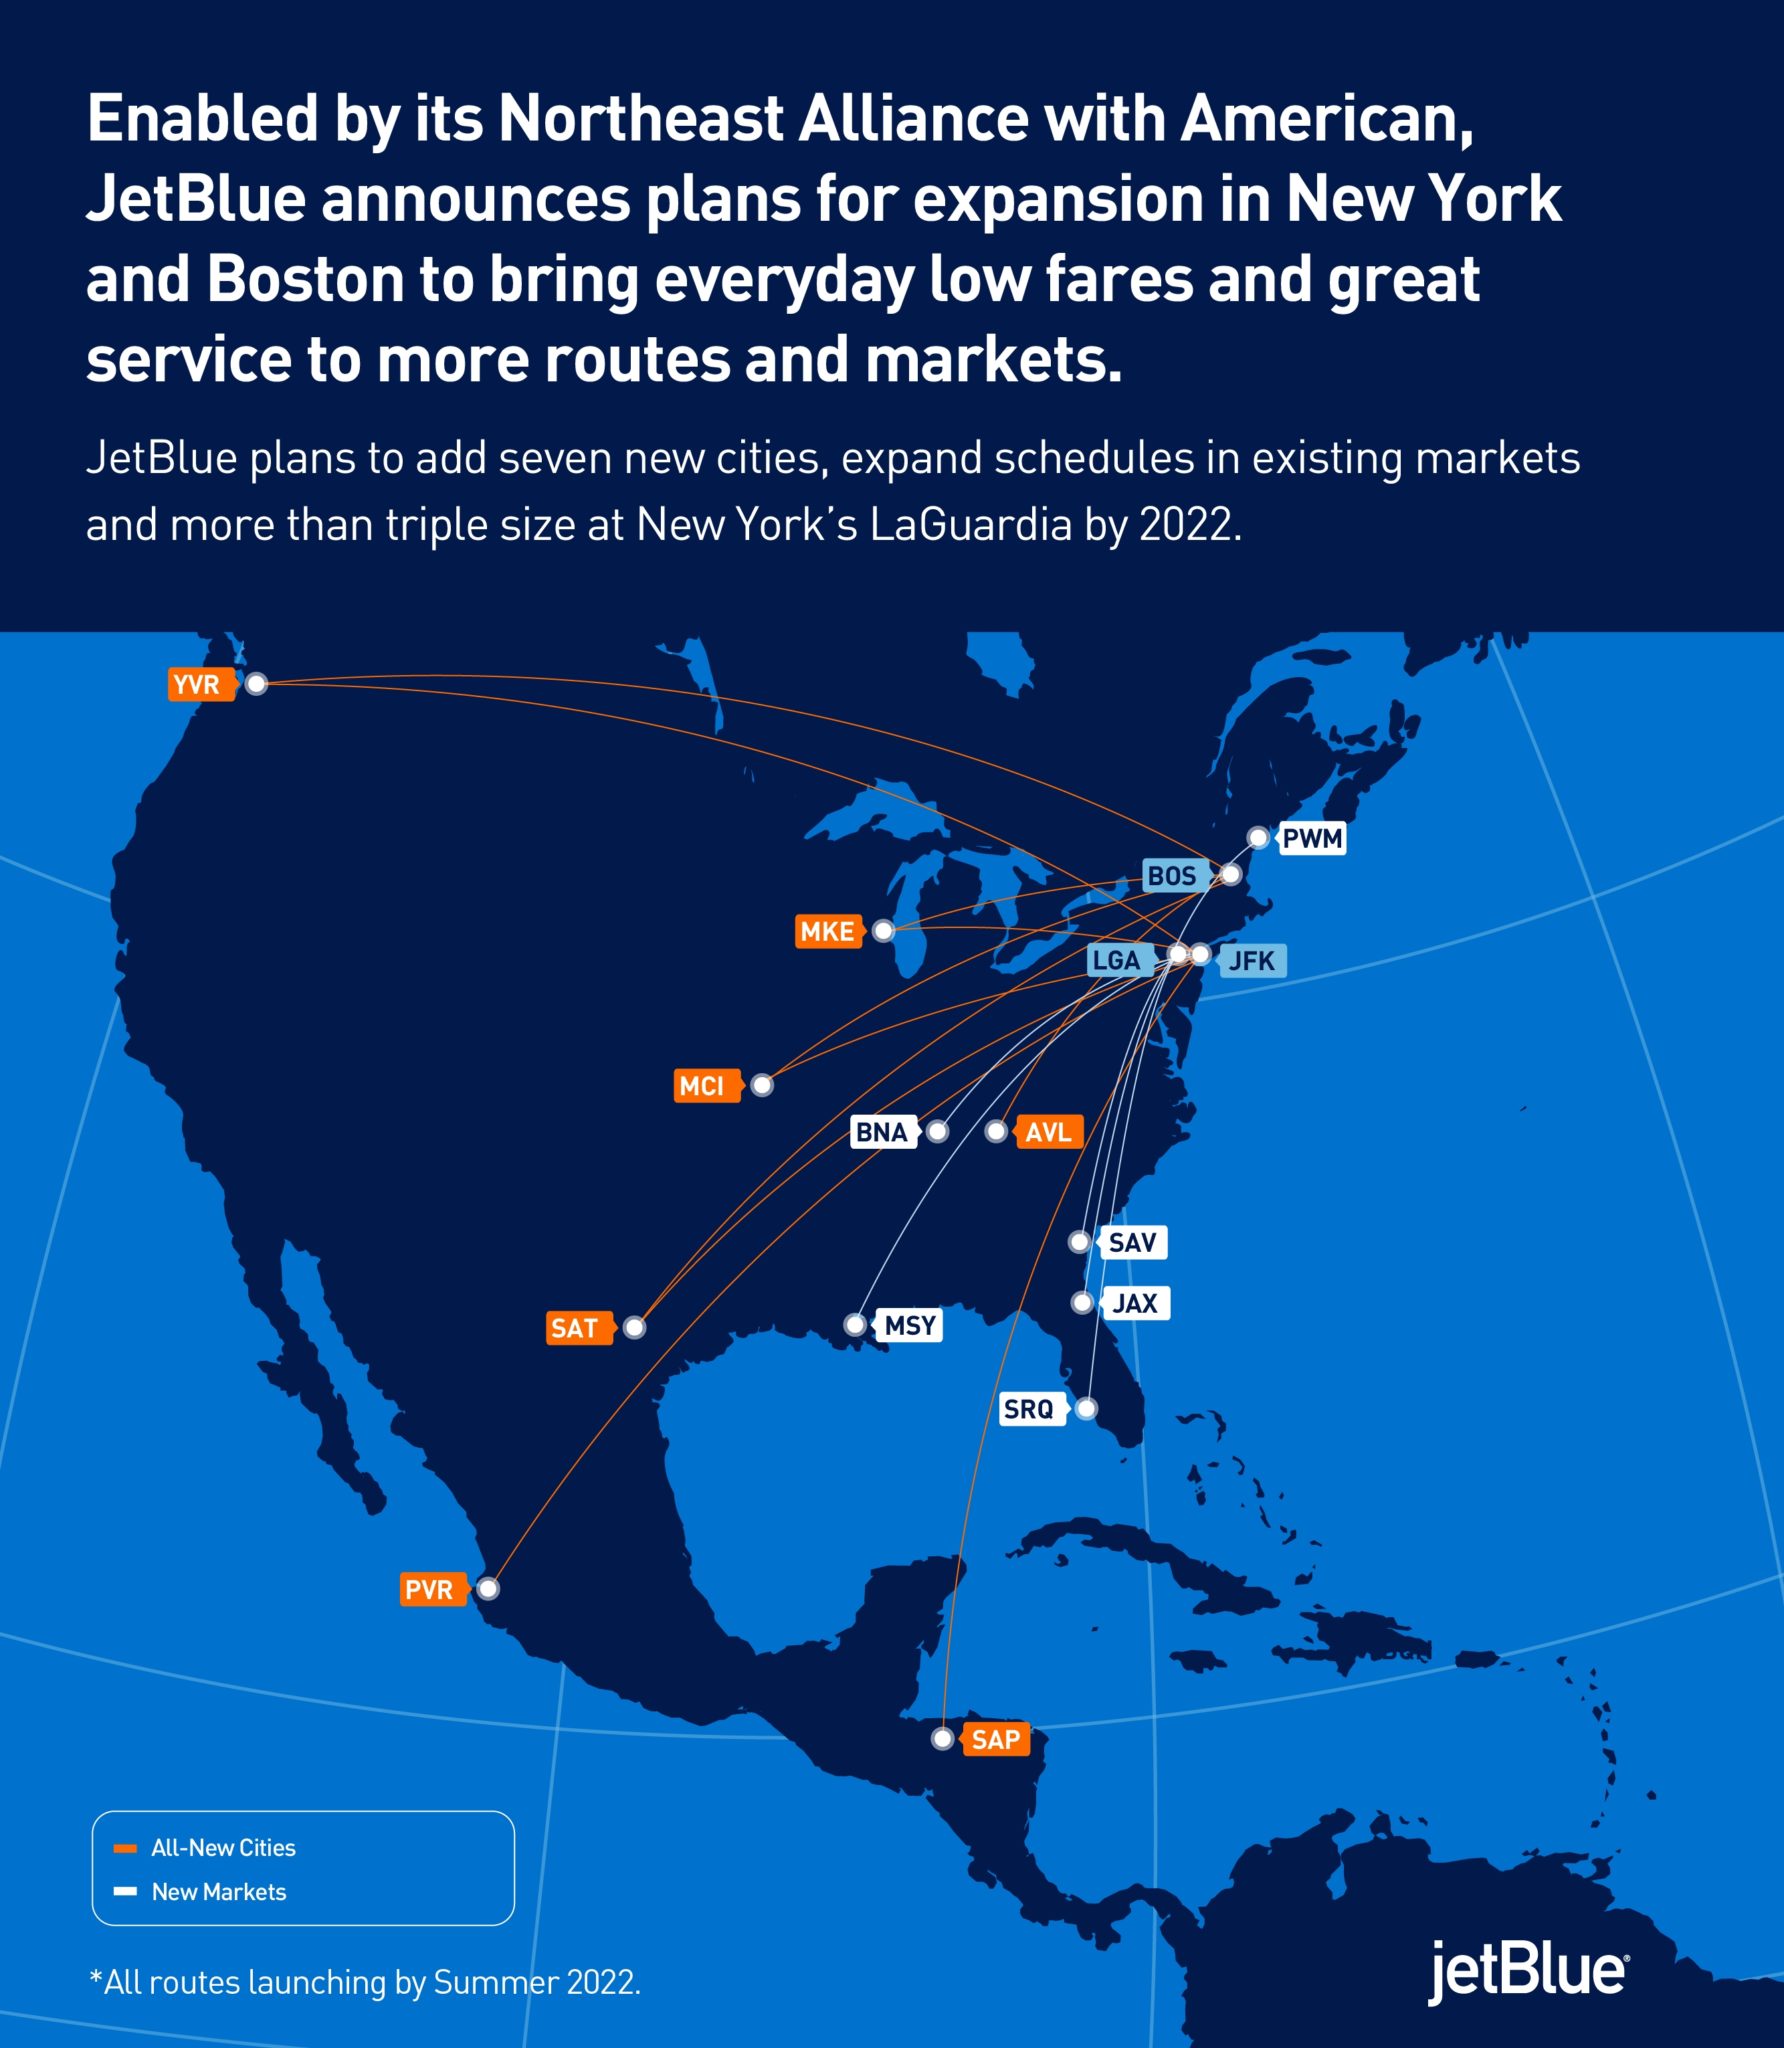 JetBlue announces 7 new destinations and increased service from its hubs in the Northeast